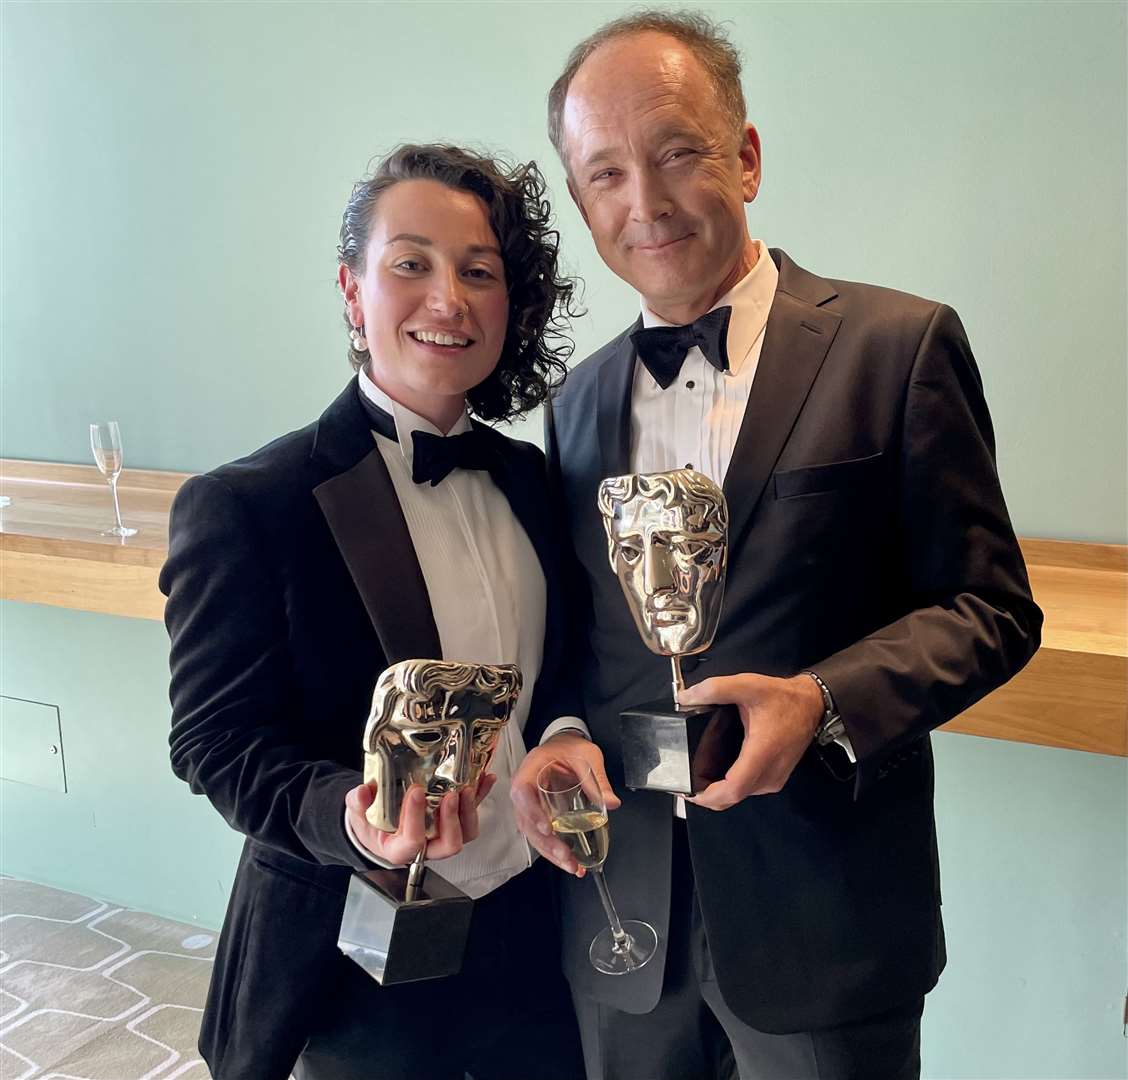 Sophie Alexander won a BAFTA with ITV colleagues. Photo: Sophie Alexander